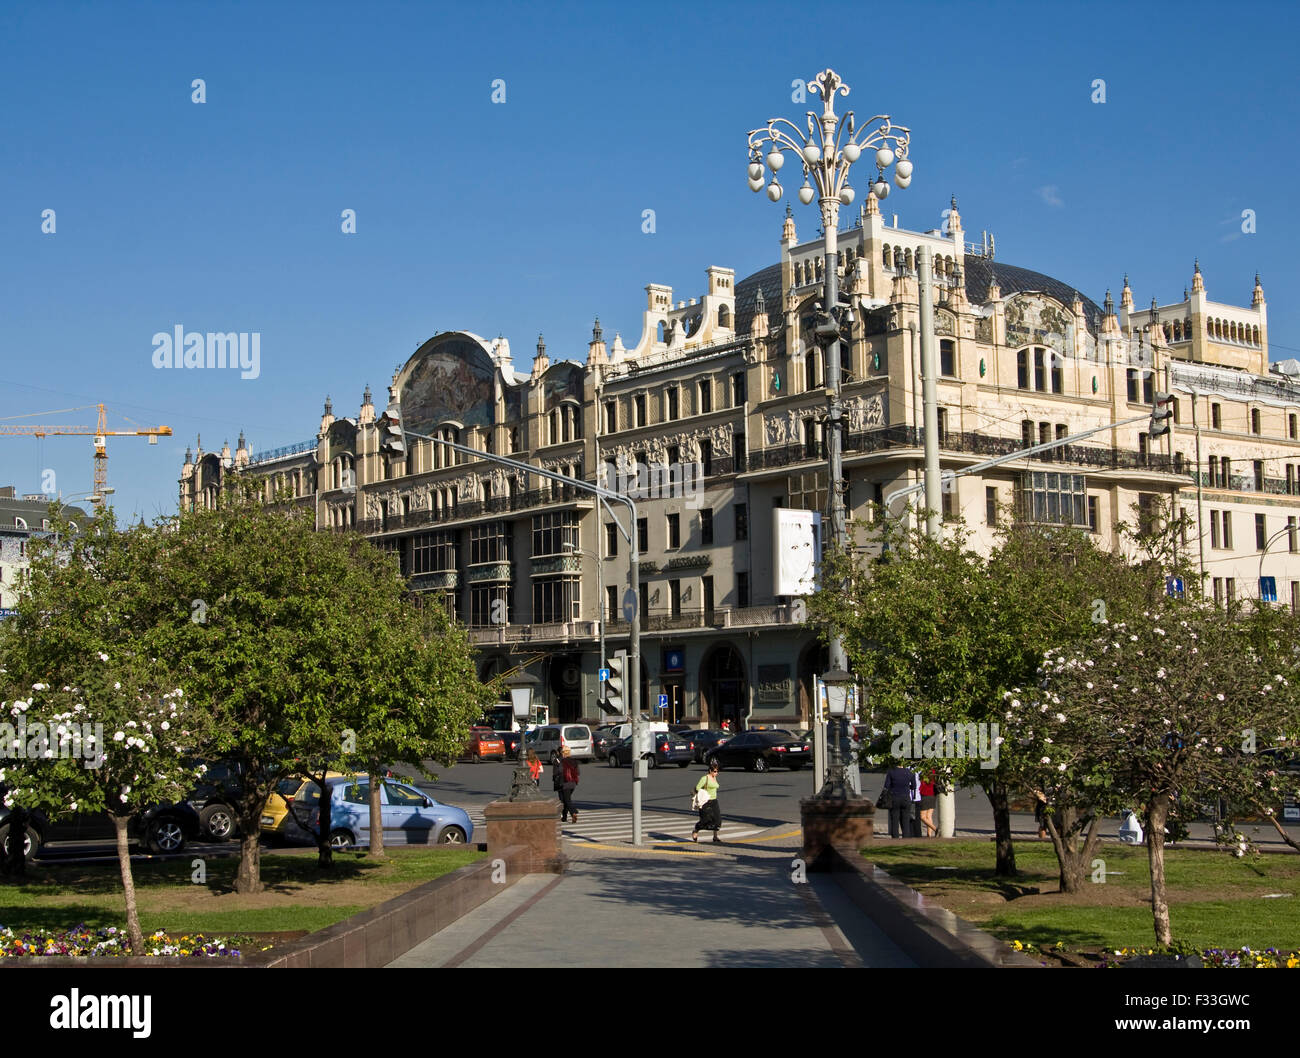 MOSCOW - MAY 12: hotel Metropol on Theatre square, May 12, 2011, in town Moscow, Russia, landmark of modern style built in 1899- Stock Photo